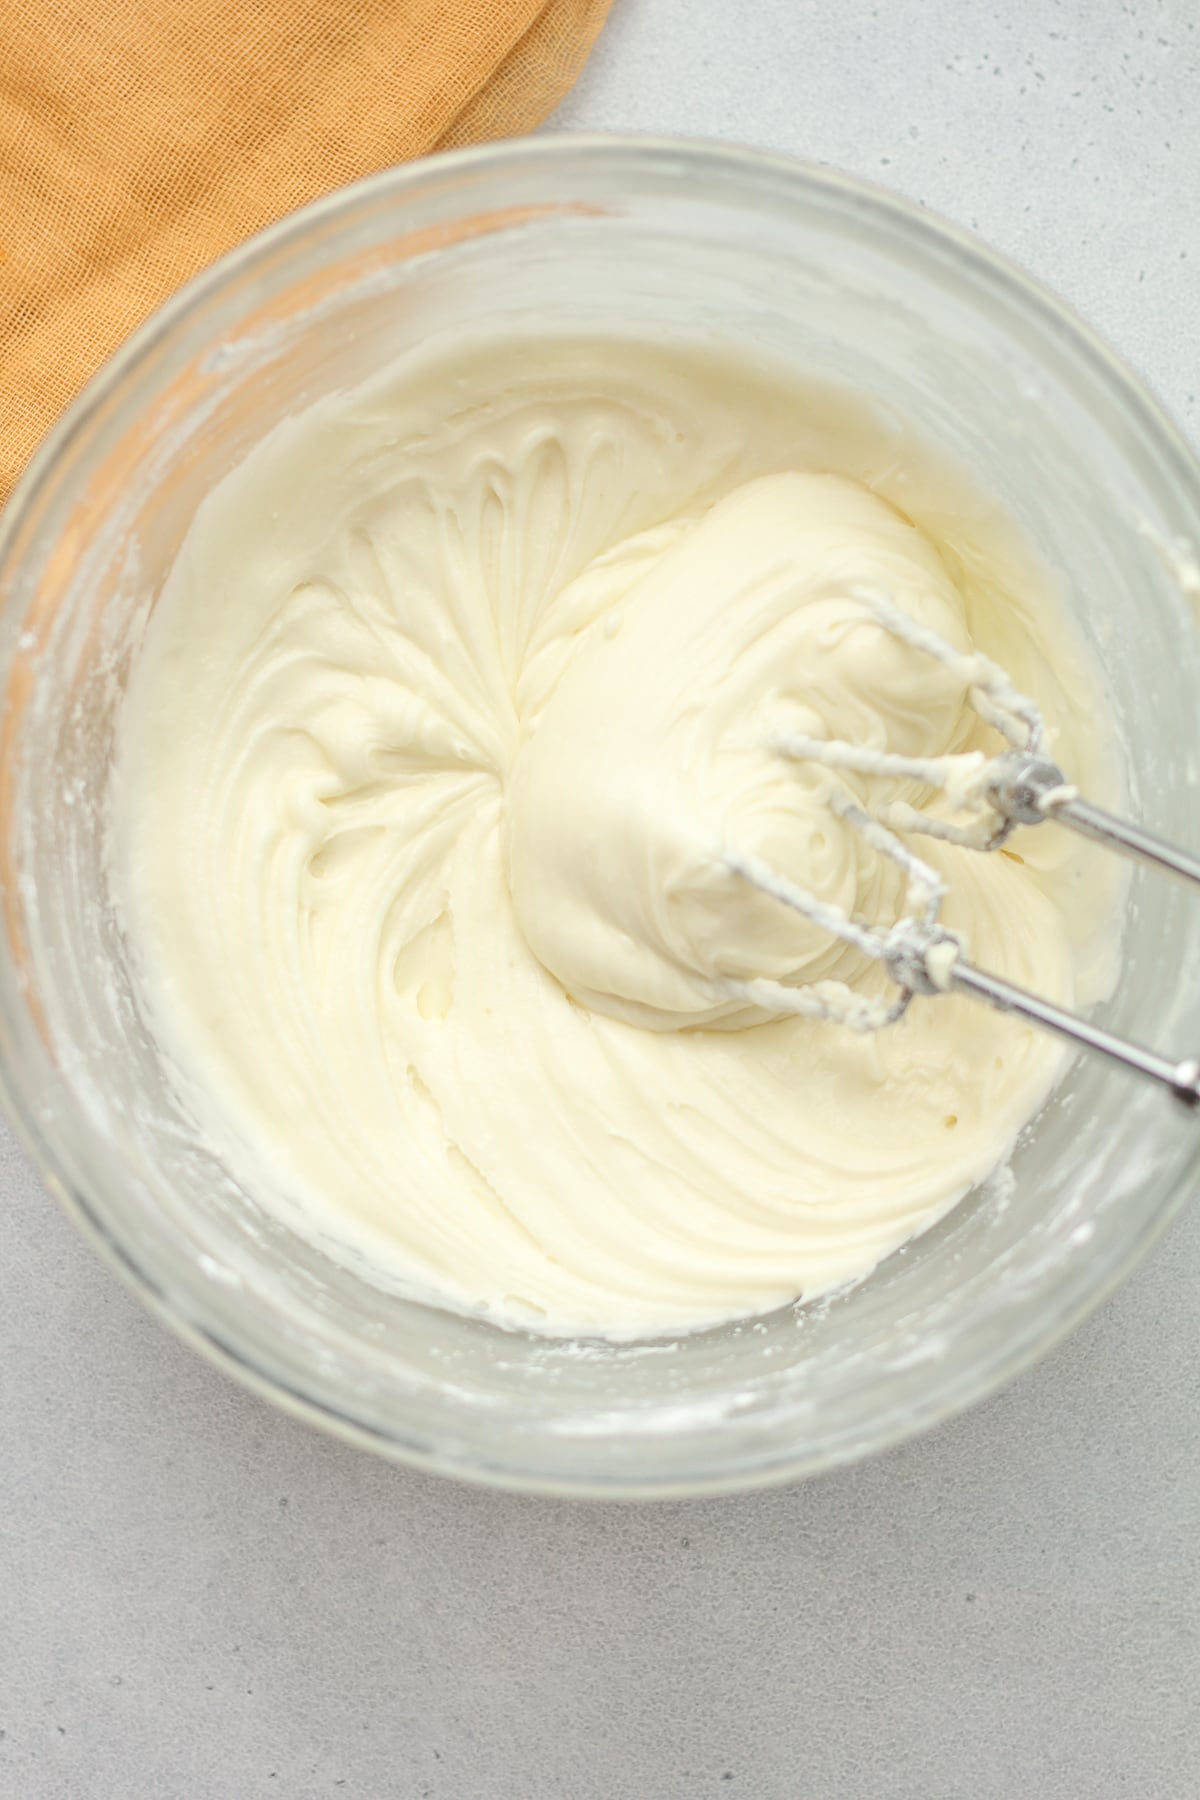 A bowl of whipped cream cheese frosting.